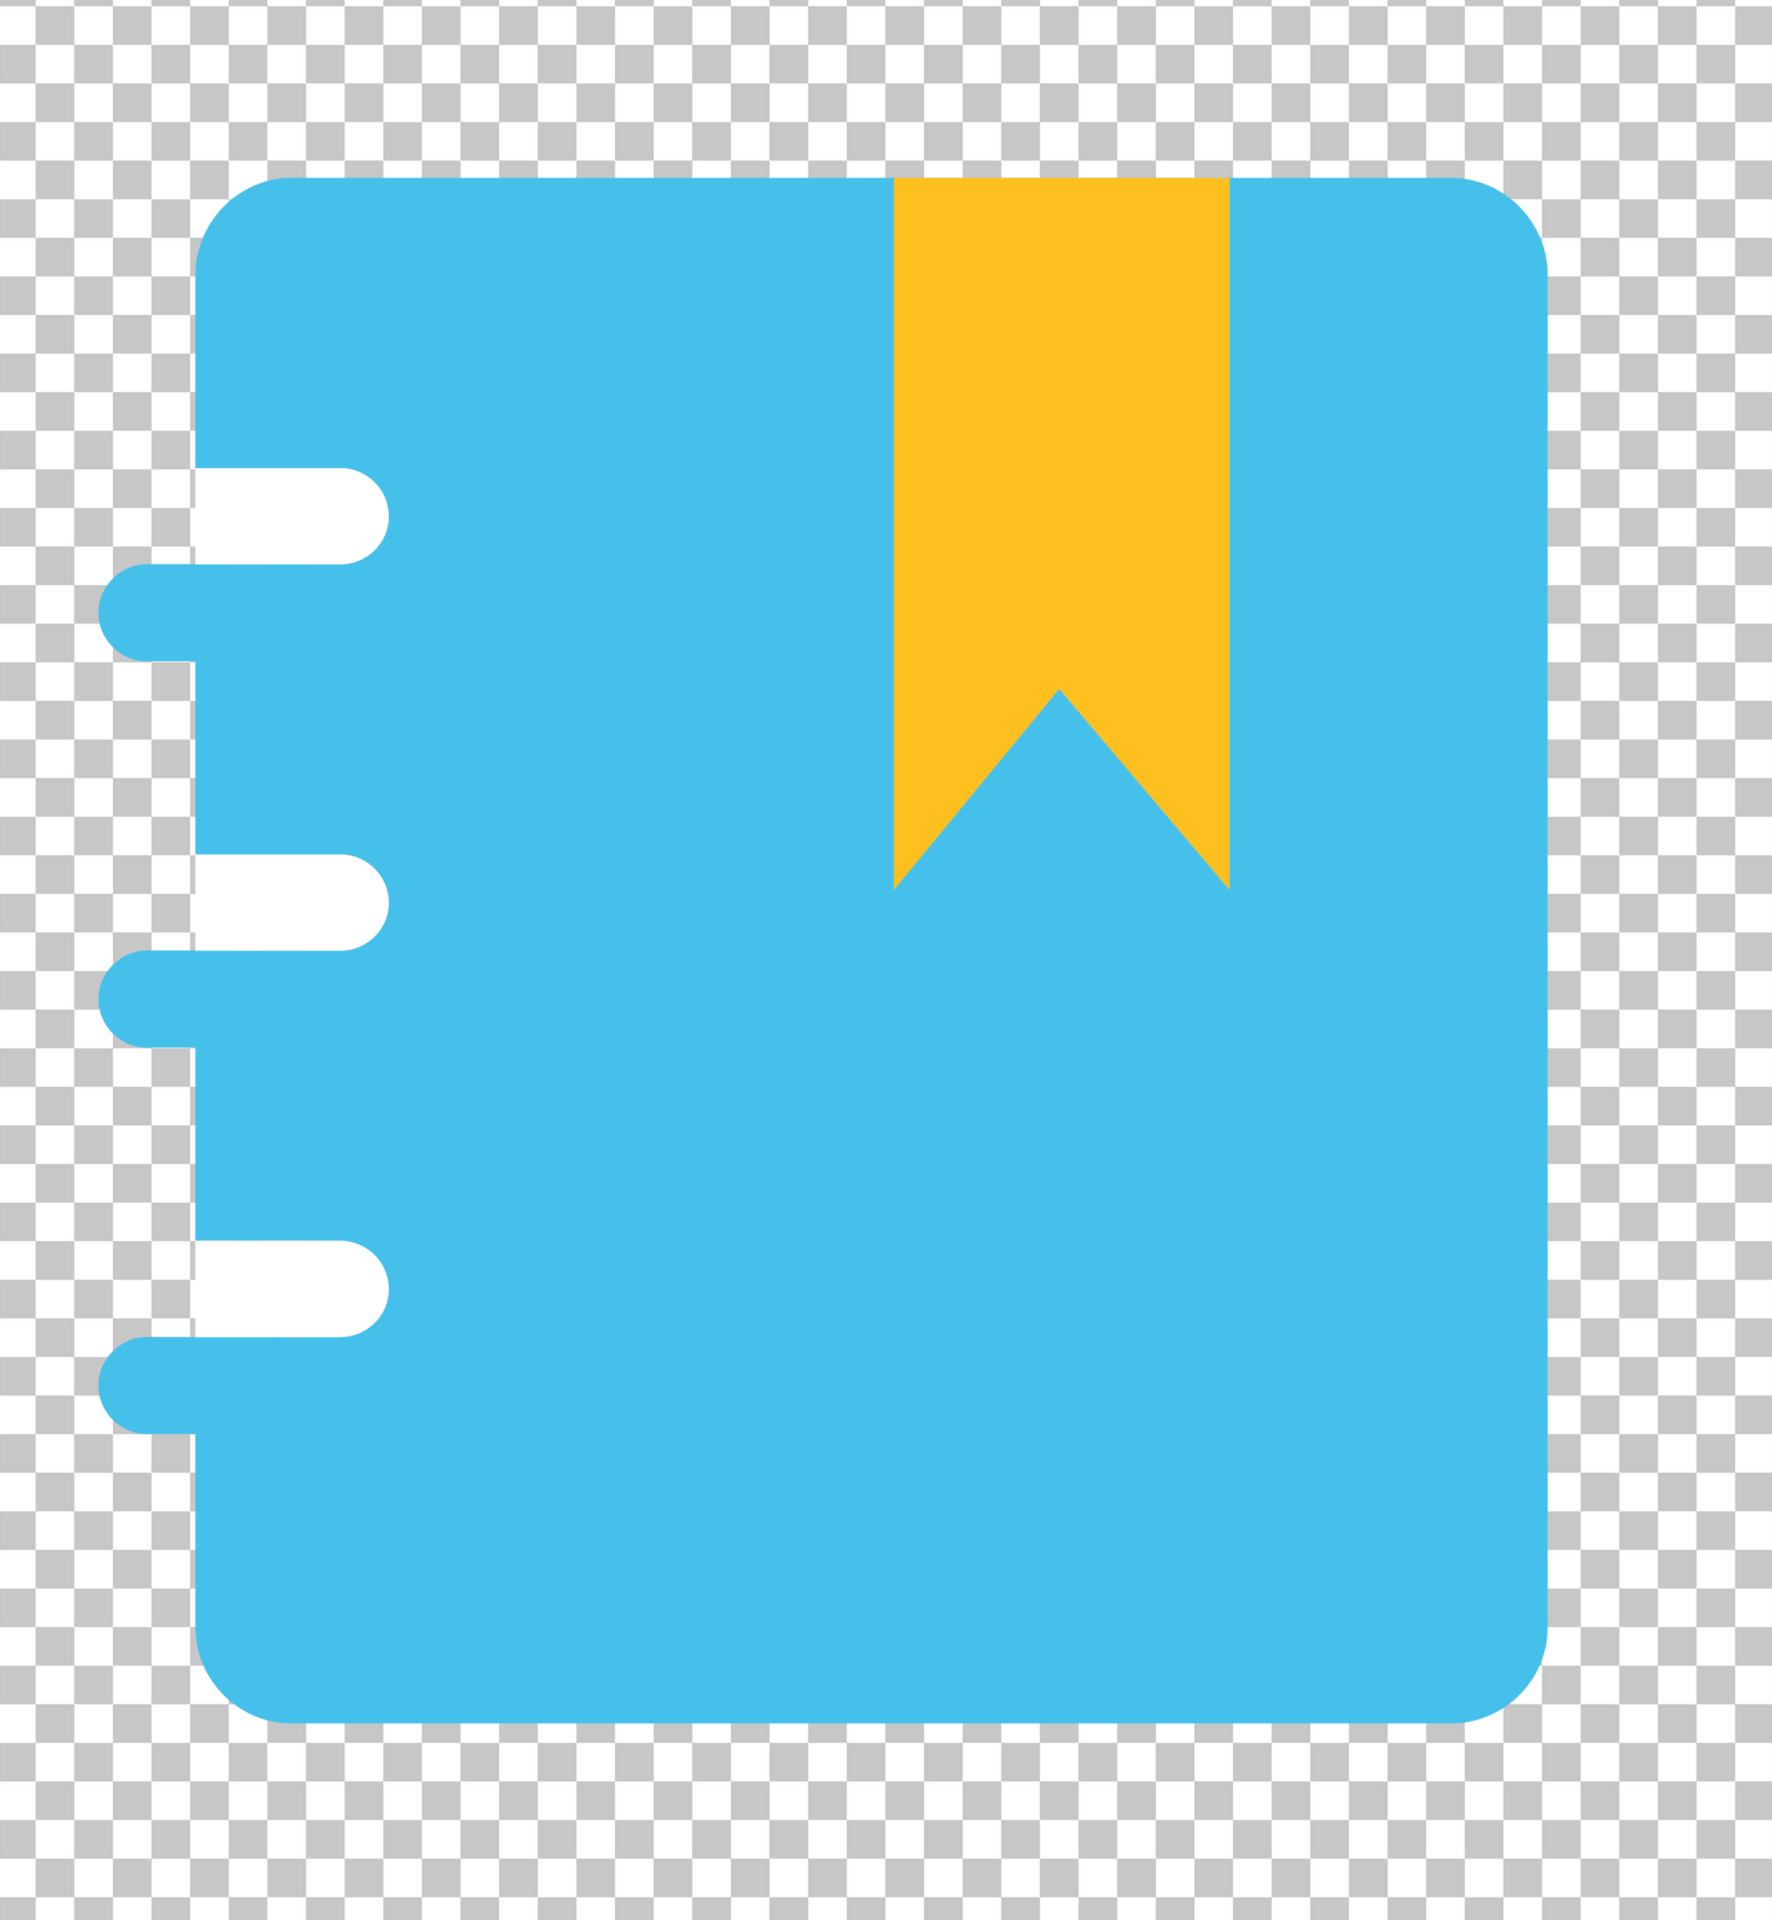 Blue Notebook with Yellow Ribbon Bookmark PNG Image